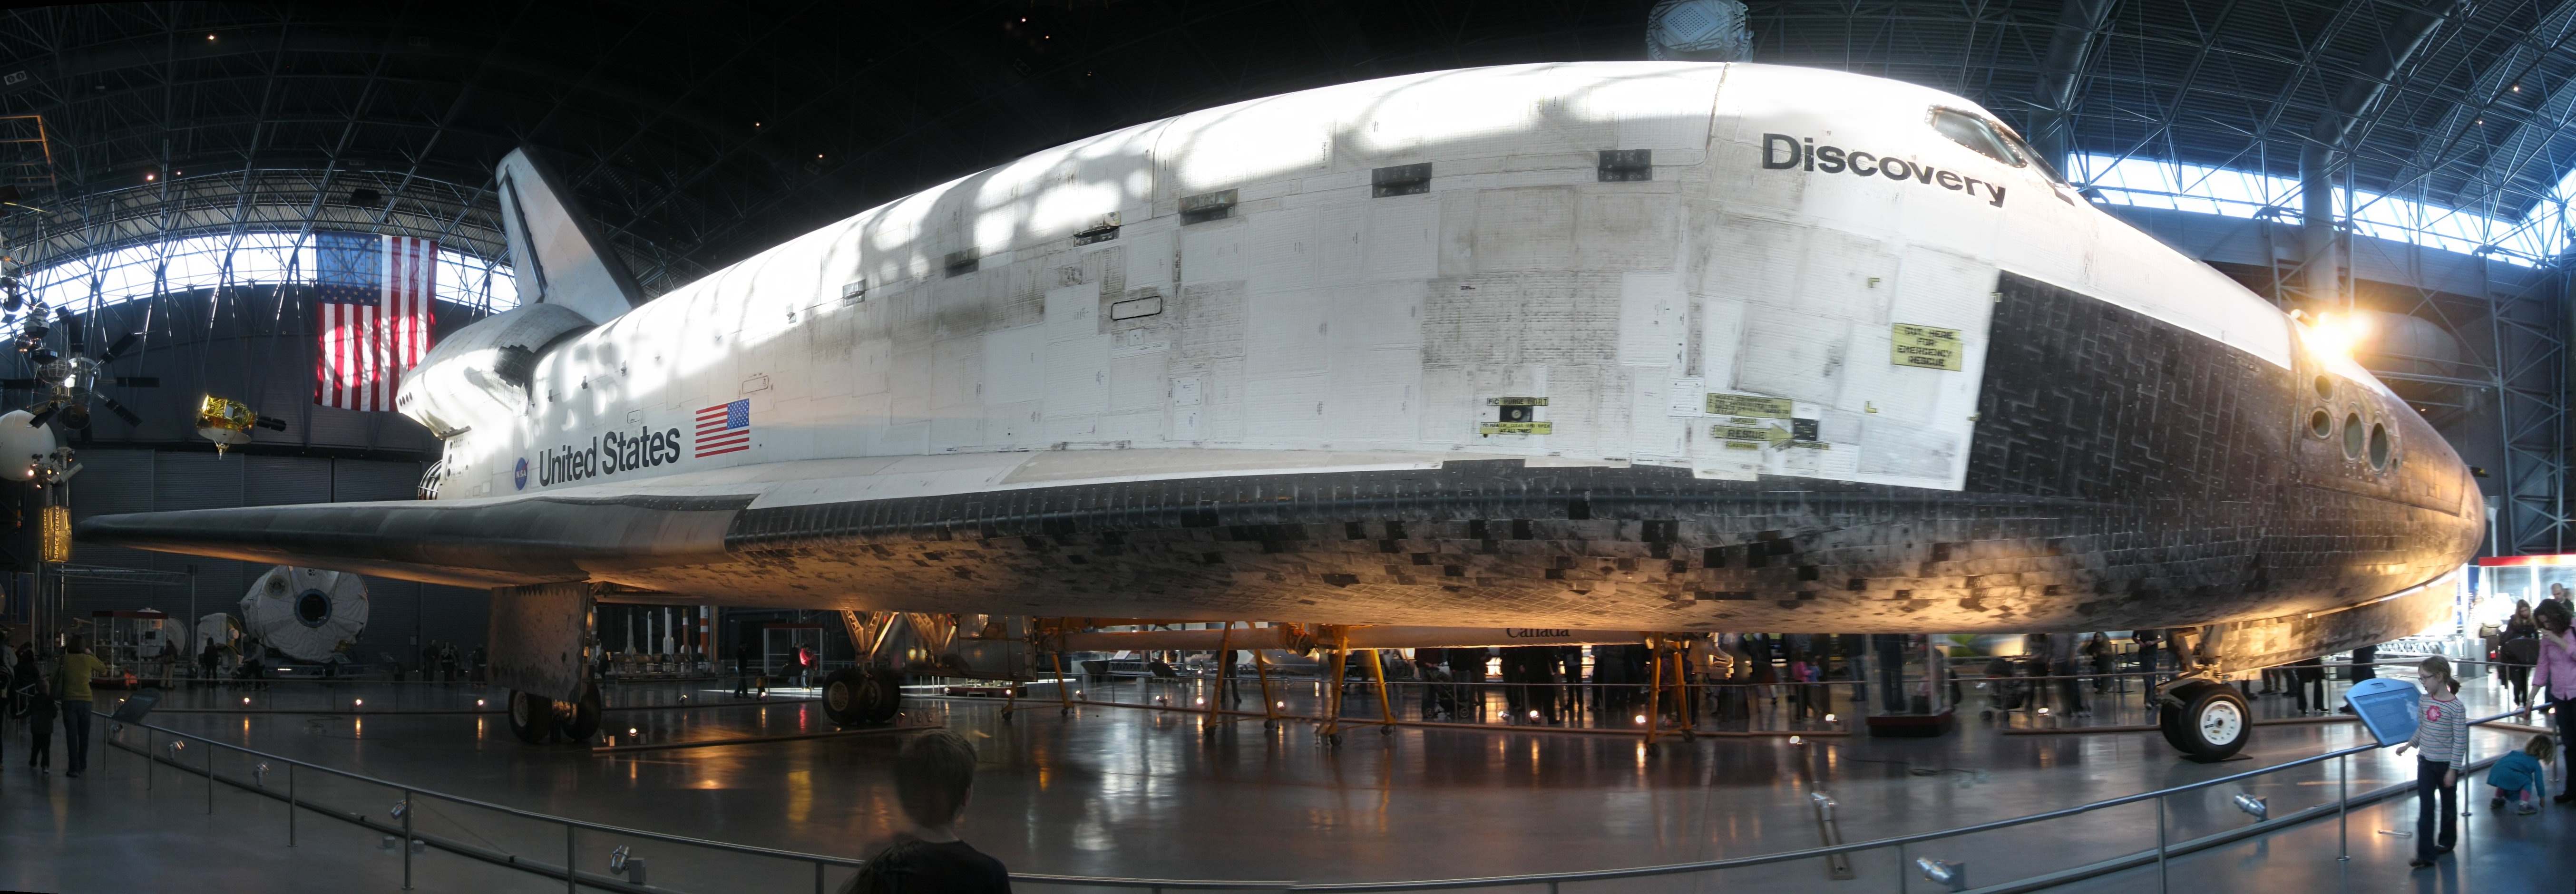 Photo of the Space Shuttle Discovery at the Udvar Hazy Air & Space Museum.